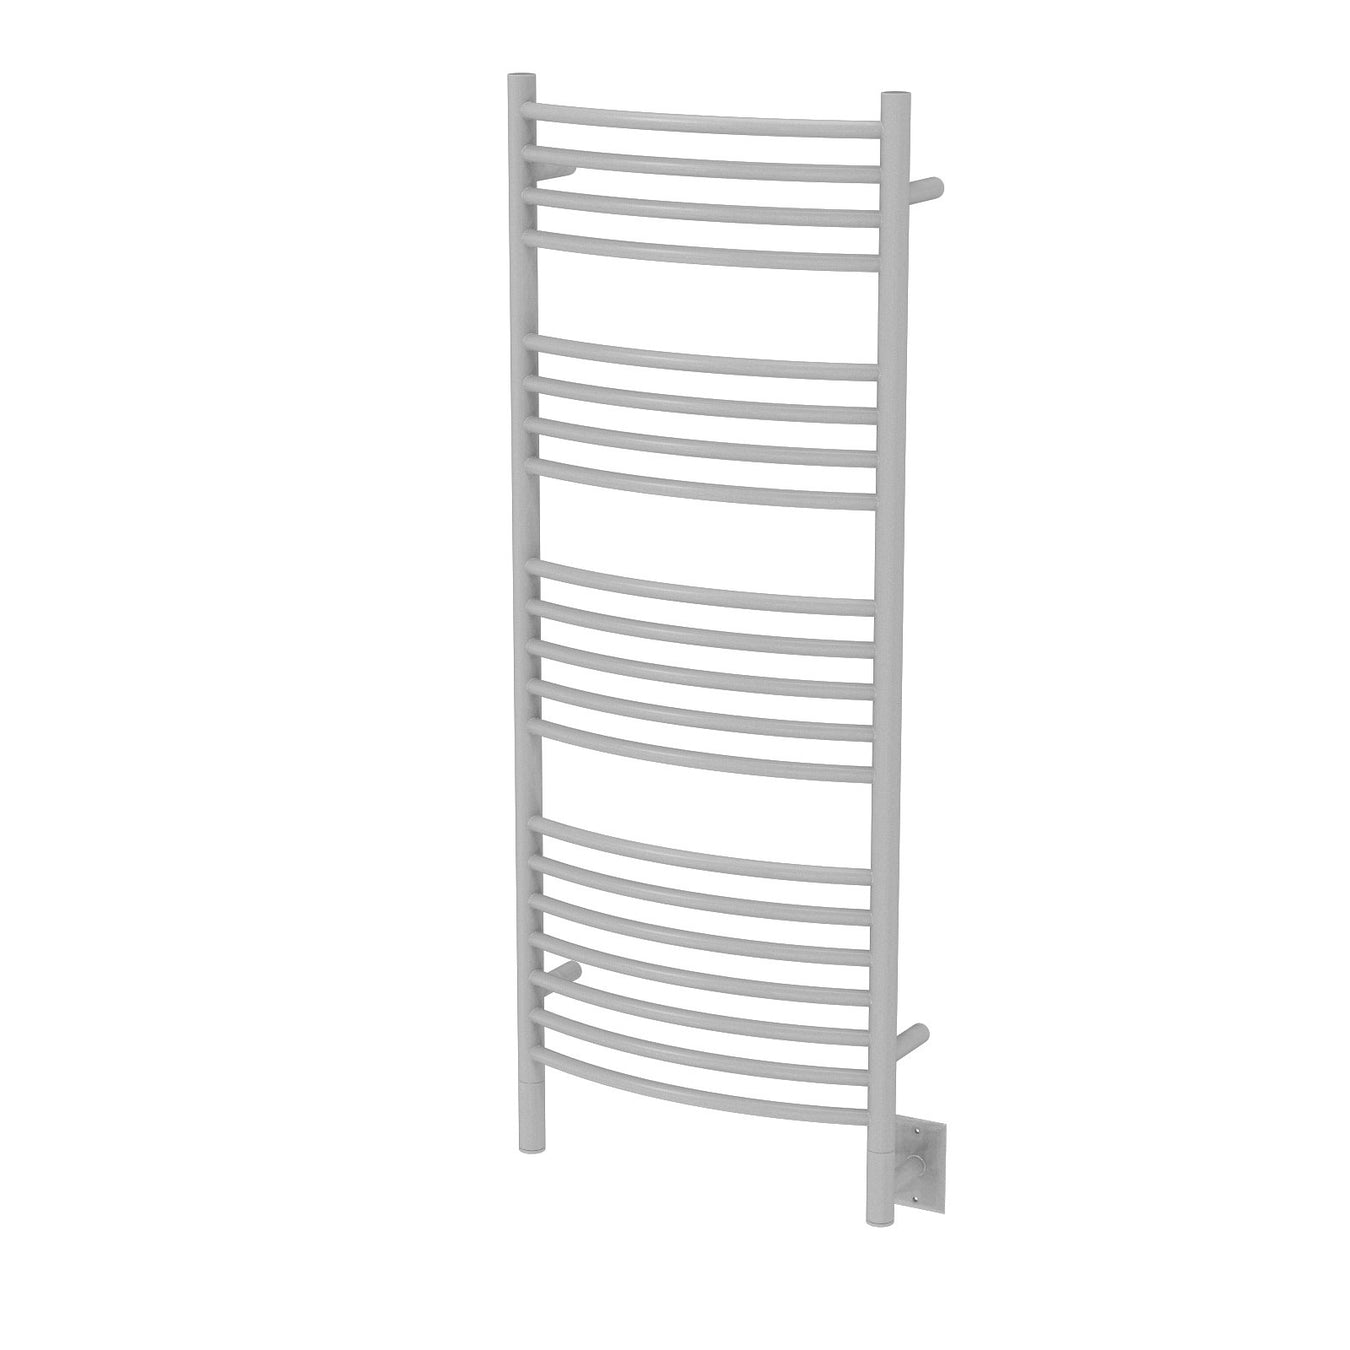 Amba Products Jeeves Collection Model D Curved Towel Warmers